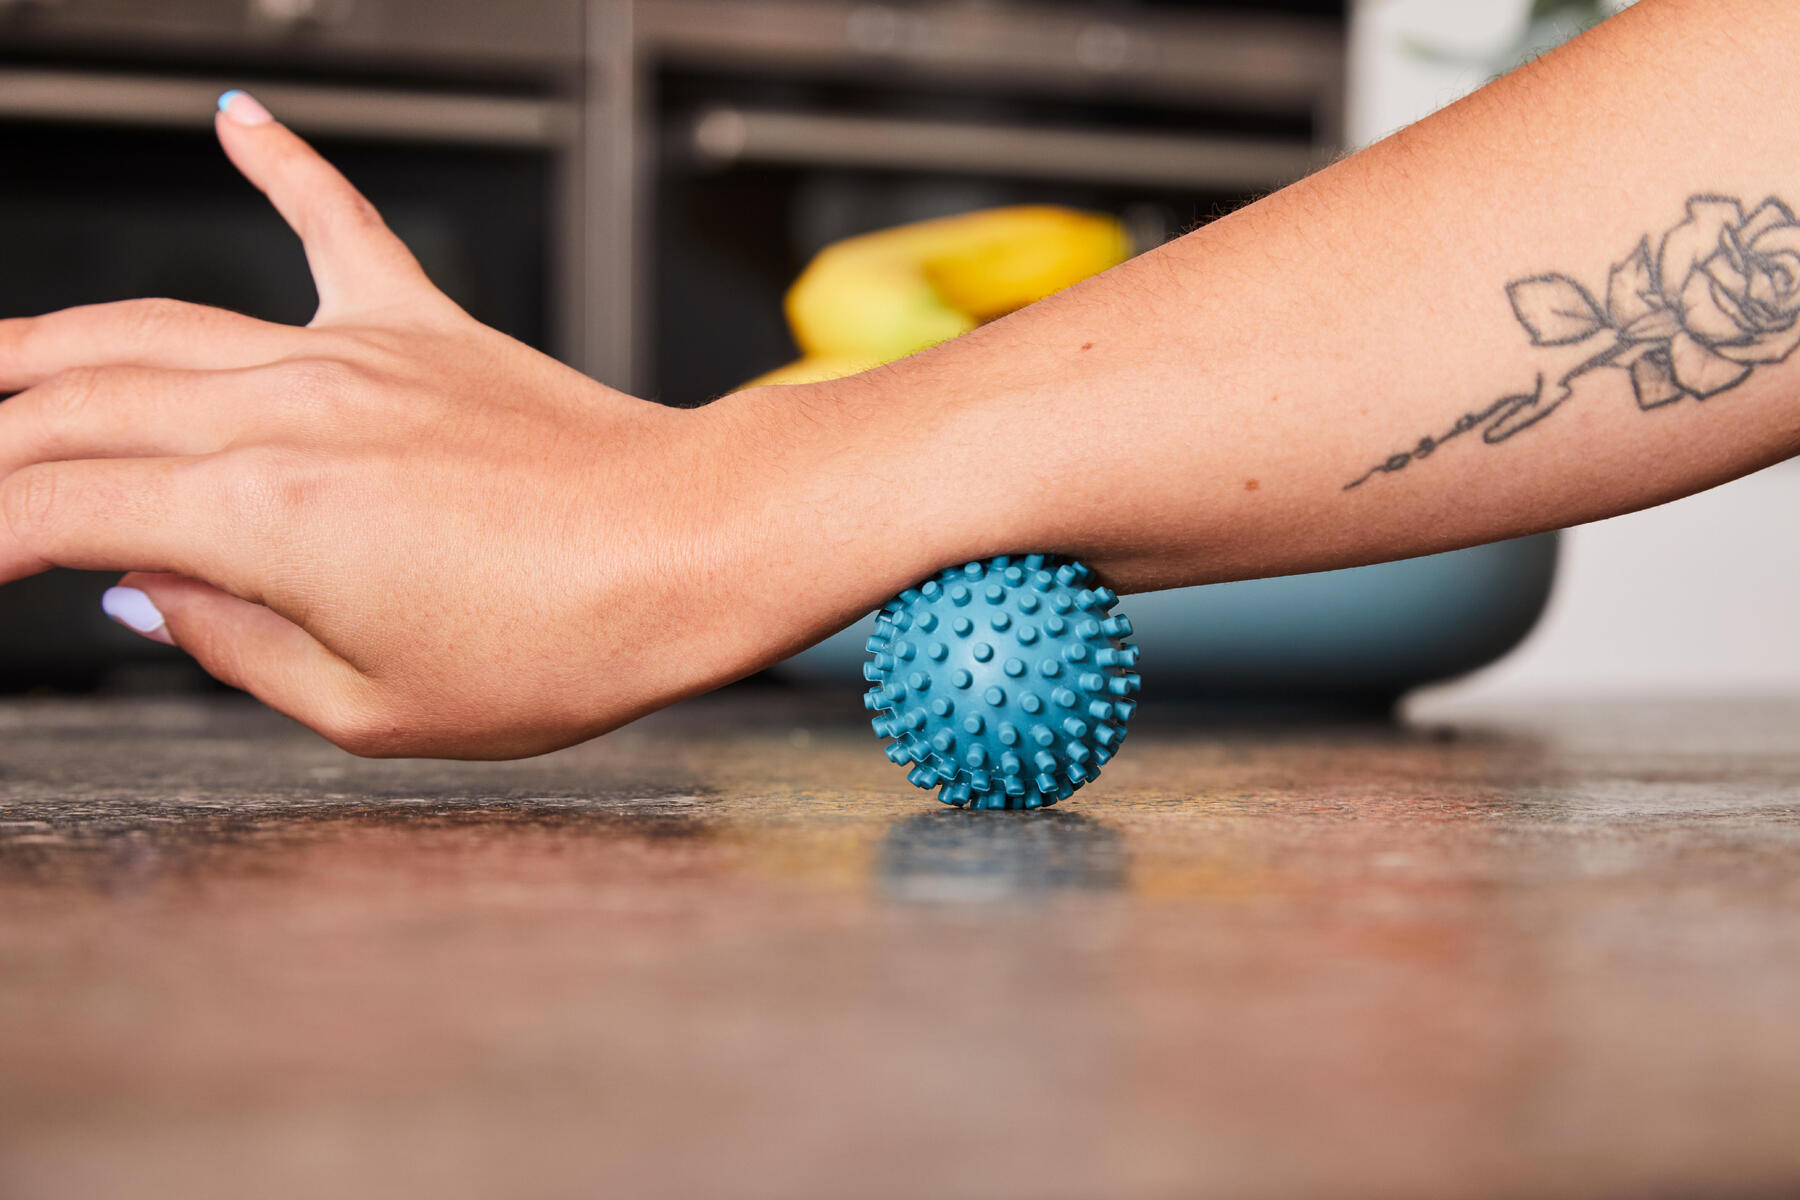 How to use a massage balls?